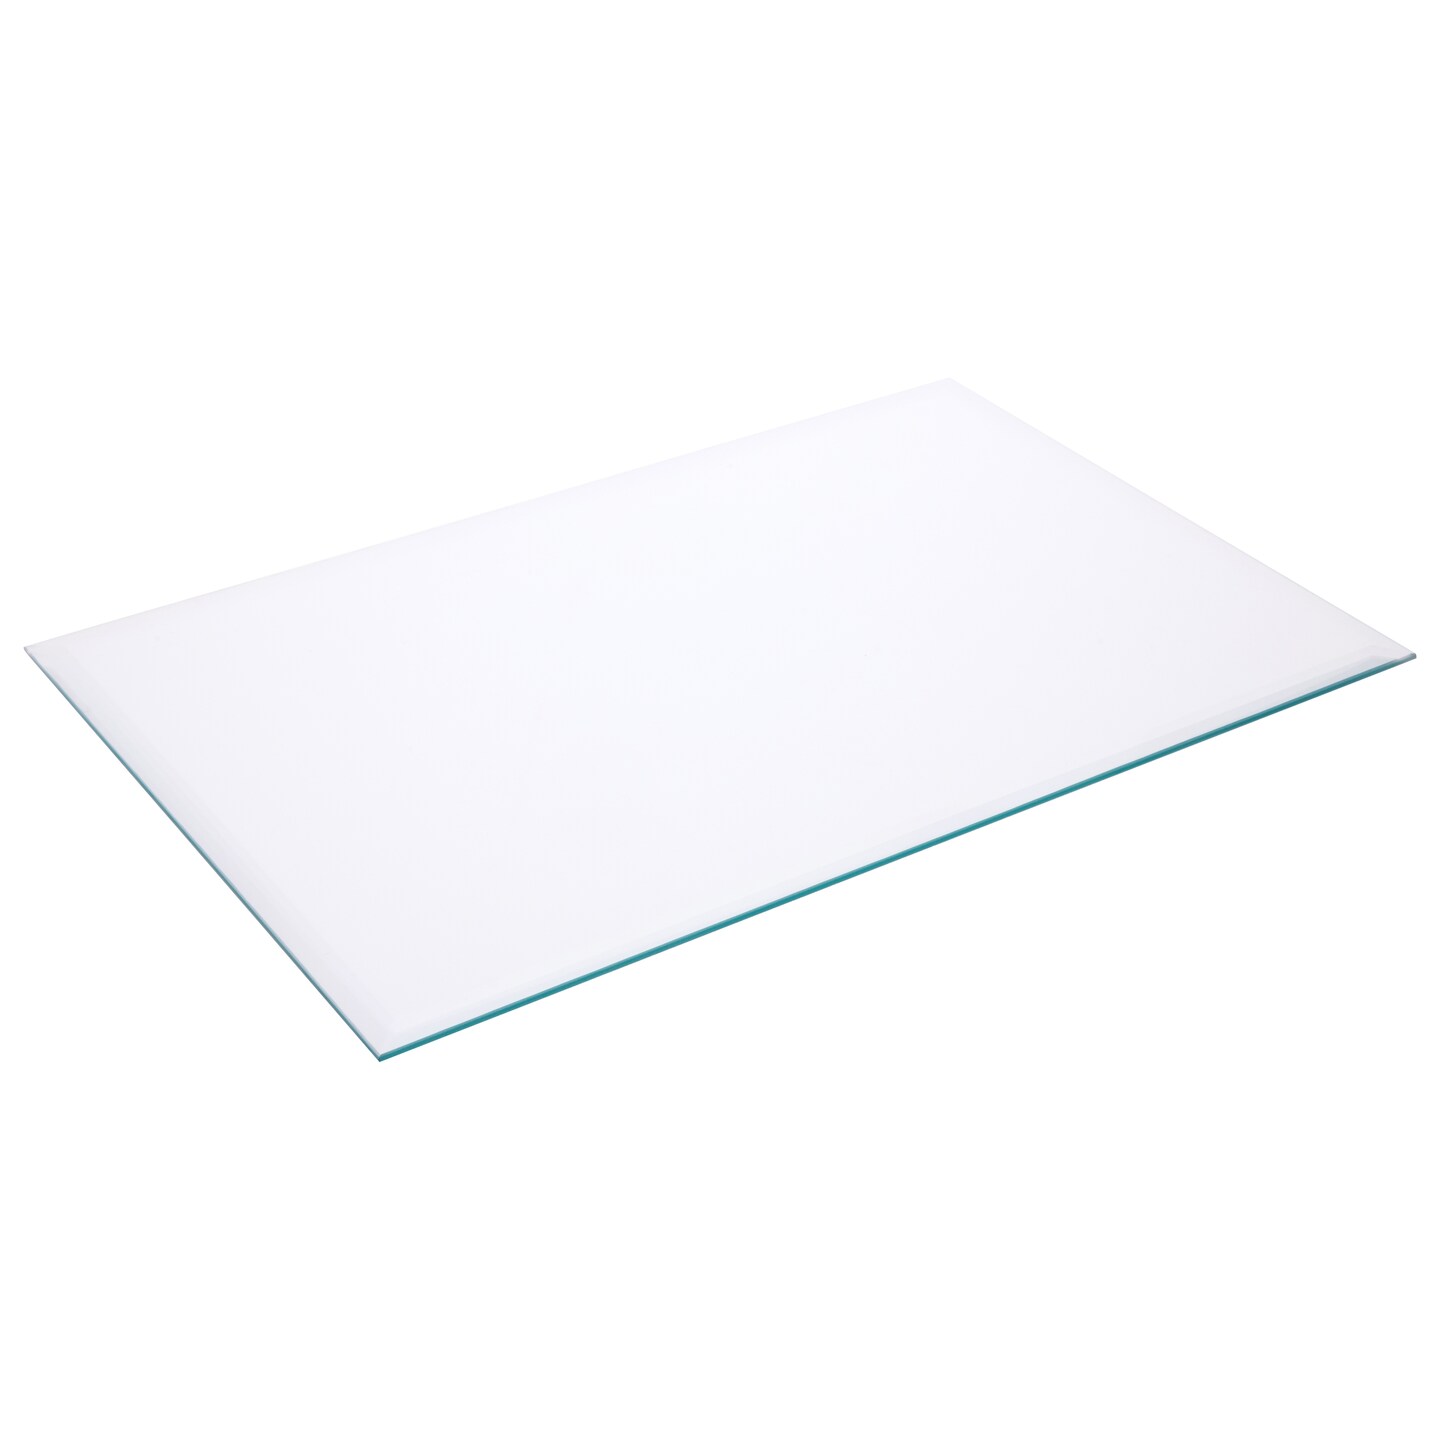 Plymor Rectangle 5mm Beveled Clear Glass, 12 inch x 18 inch